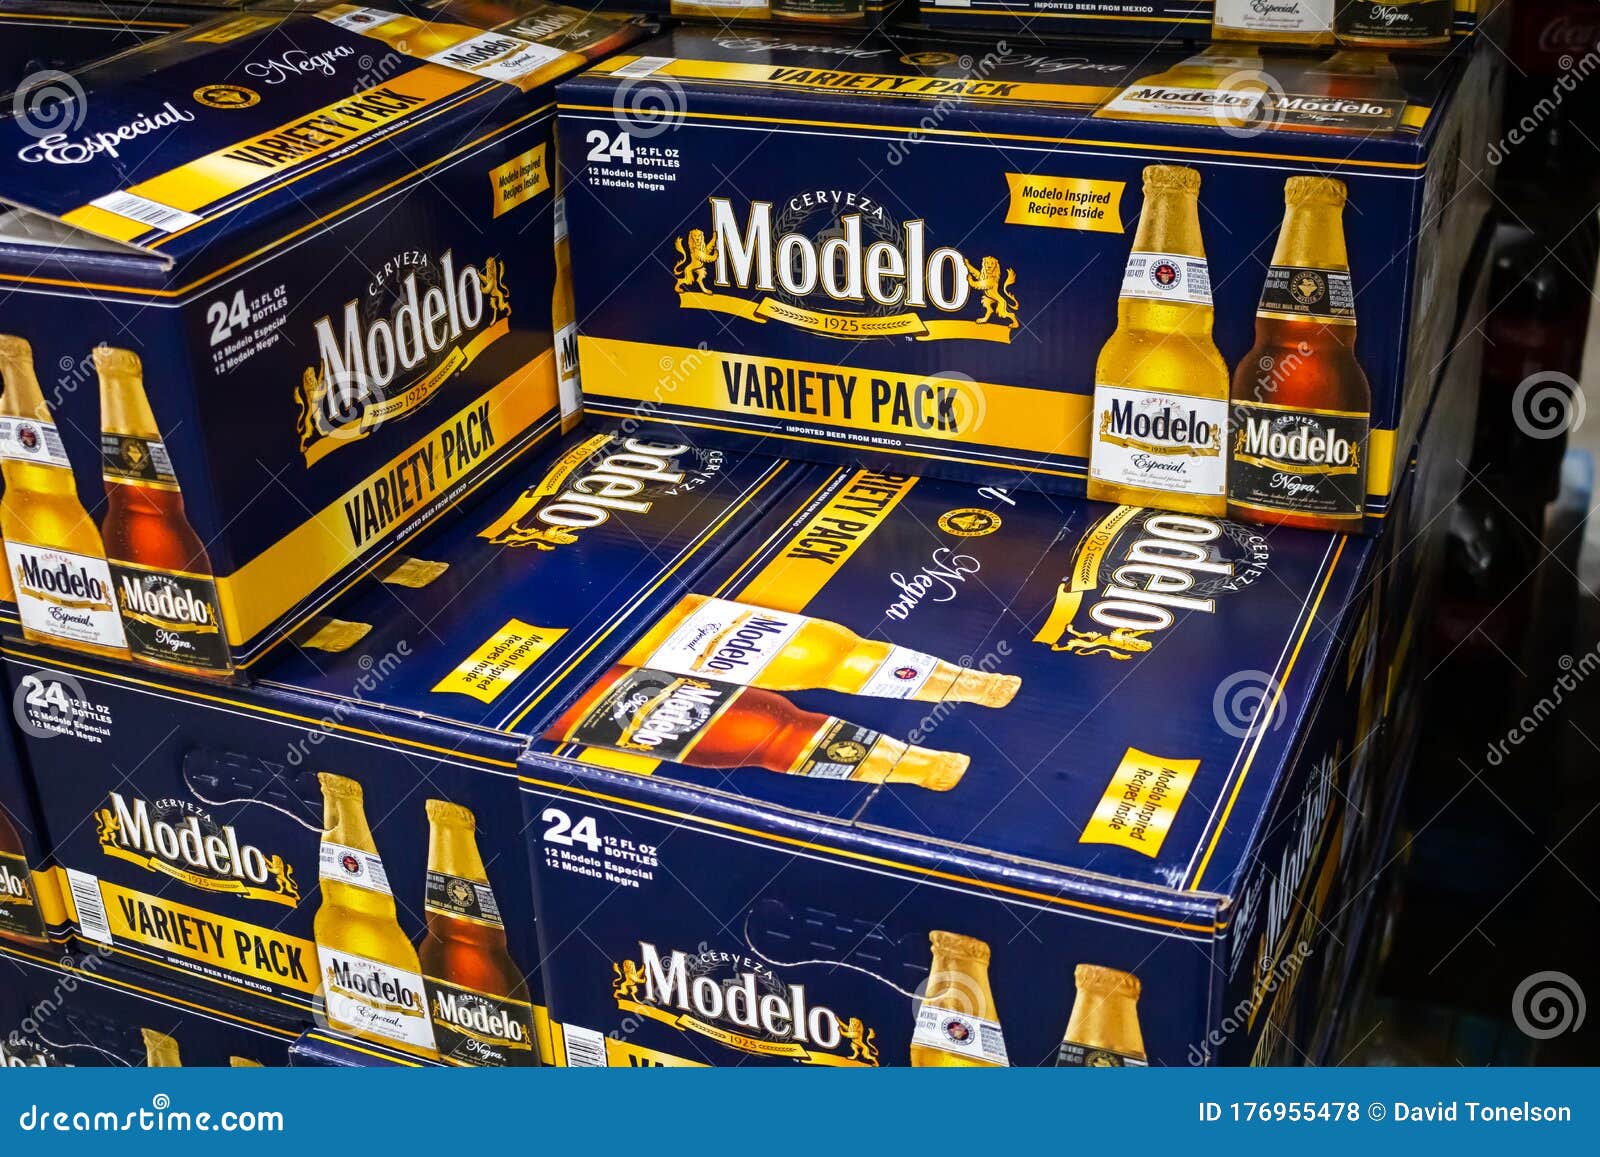 Modelo beer editorial stock photo. Image of name, bottle - 176955478